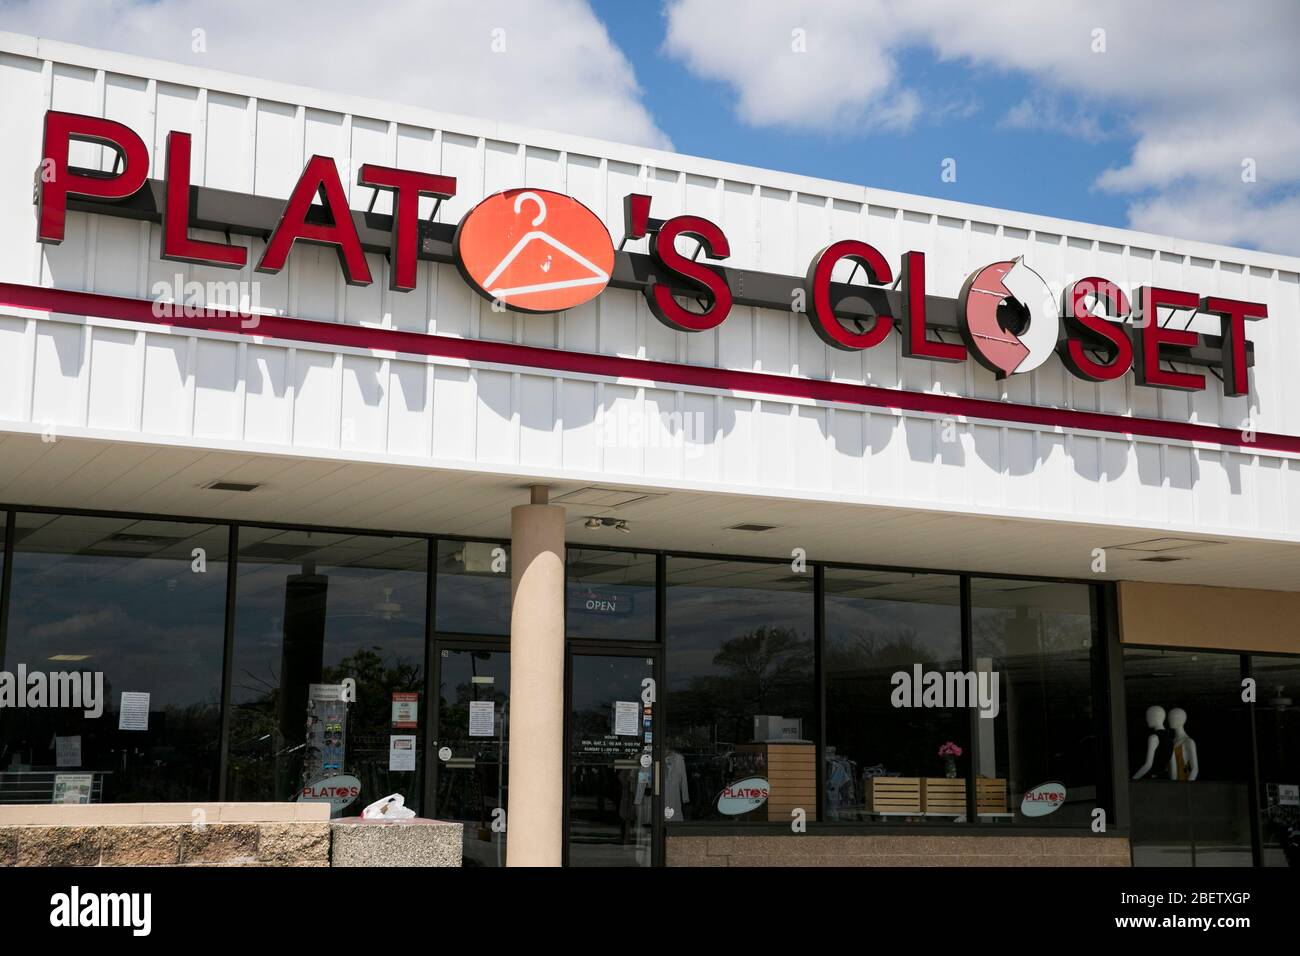 https://c8.alamy.com/comp/2BETXGP/a-logo-sign-outside-of-a-platos-closet-retail-store-location-in-deptford-township-new-jersey-on-april-11-2020-2BETXGP.jpg